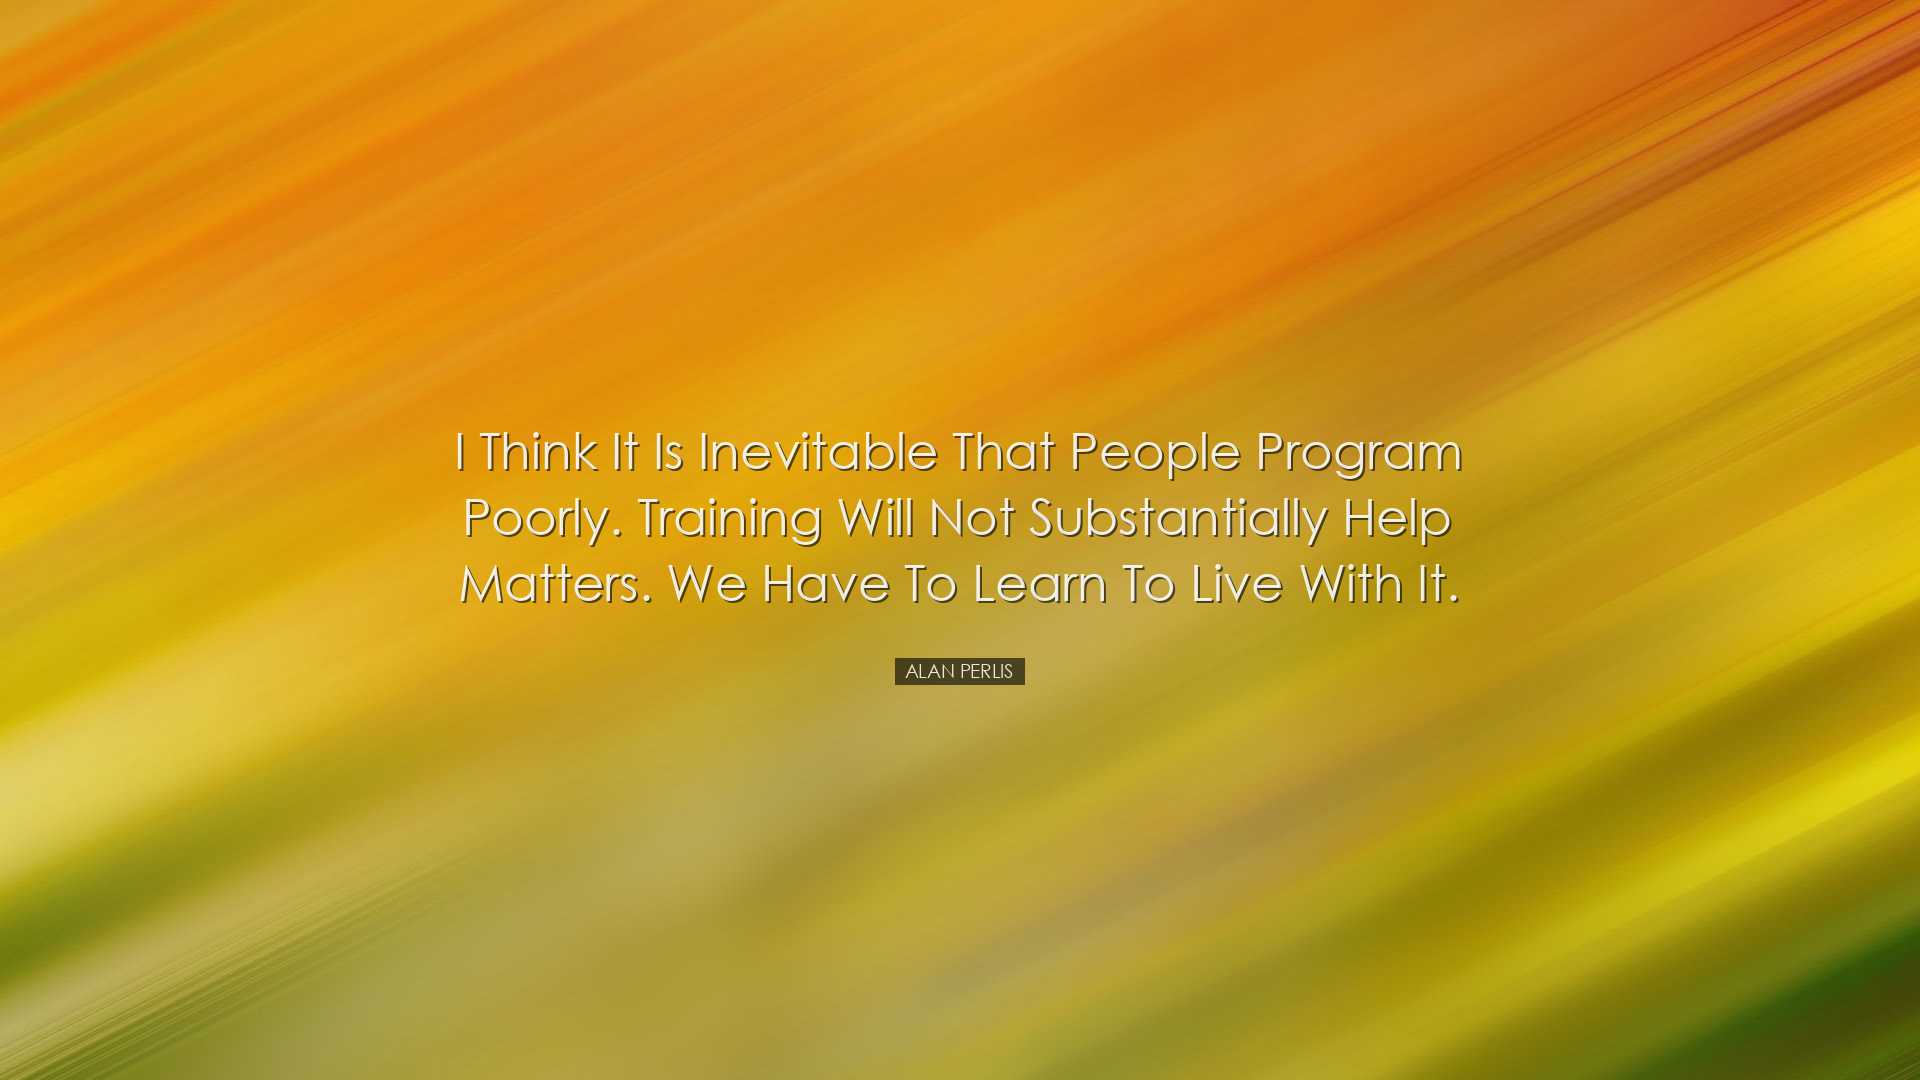 I think it is inevitable that people program poorly. Training will